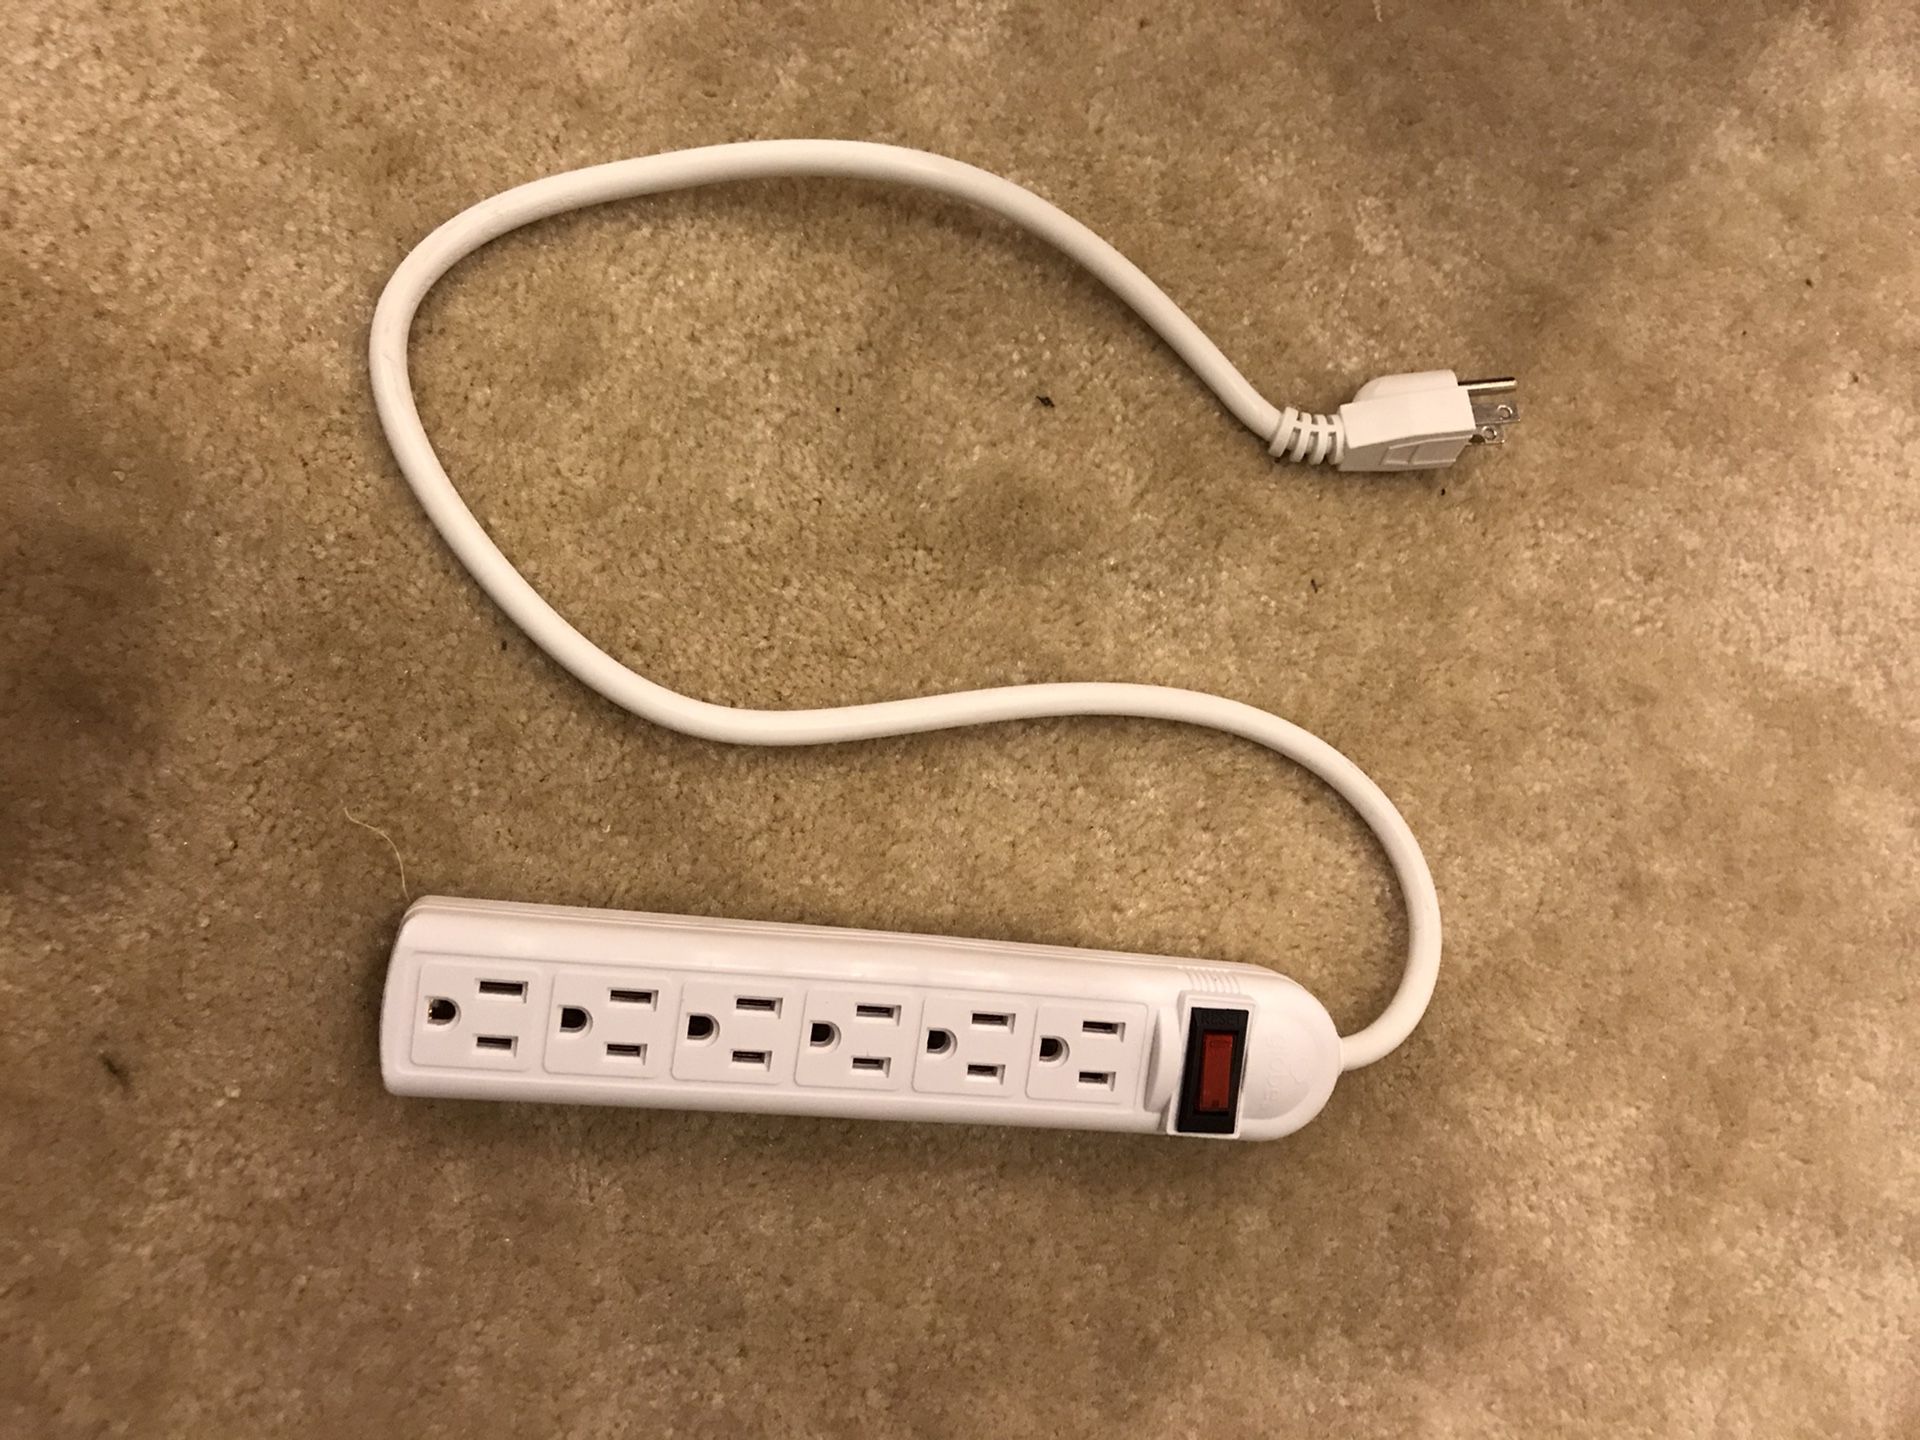 6-outlet extension cord. $5. 2.5 feet long